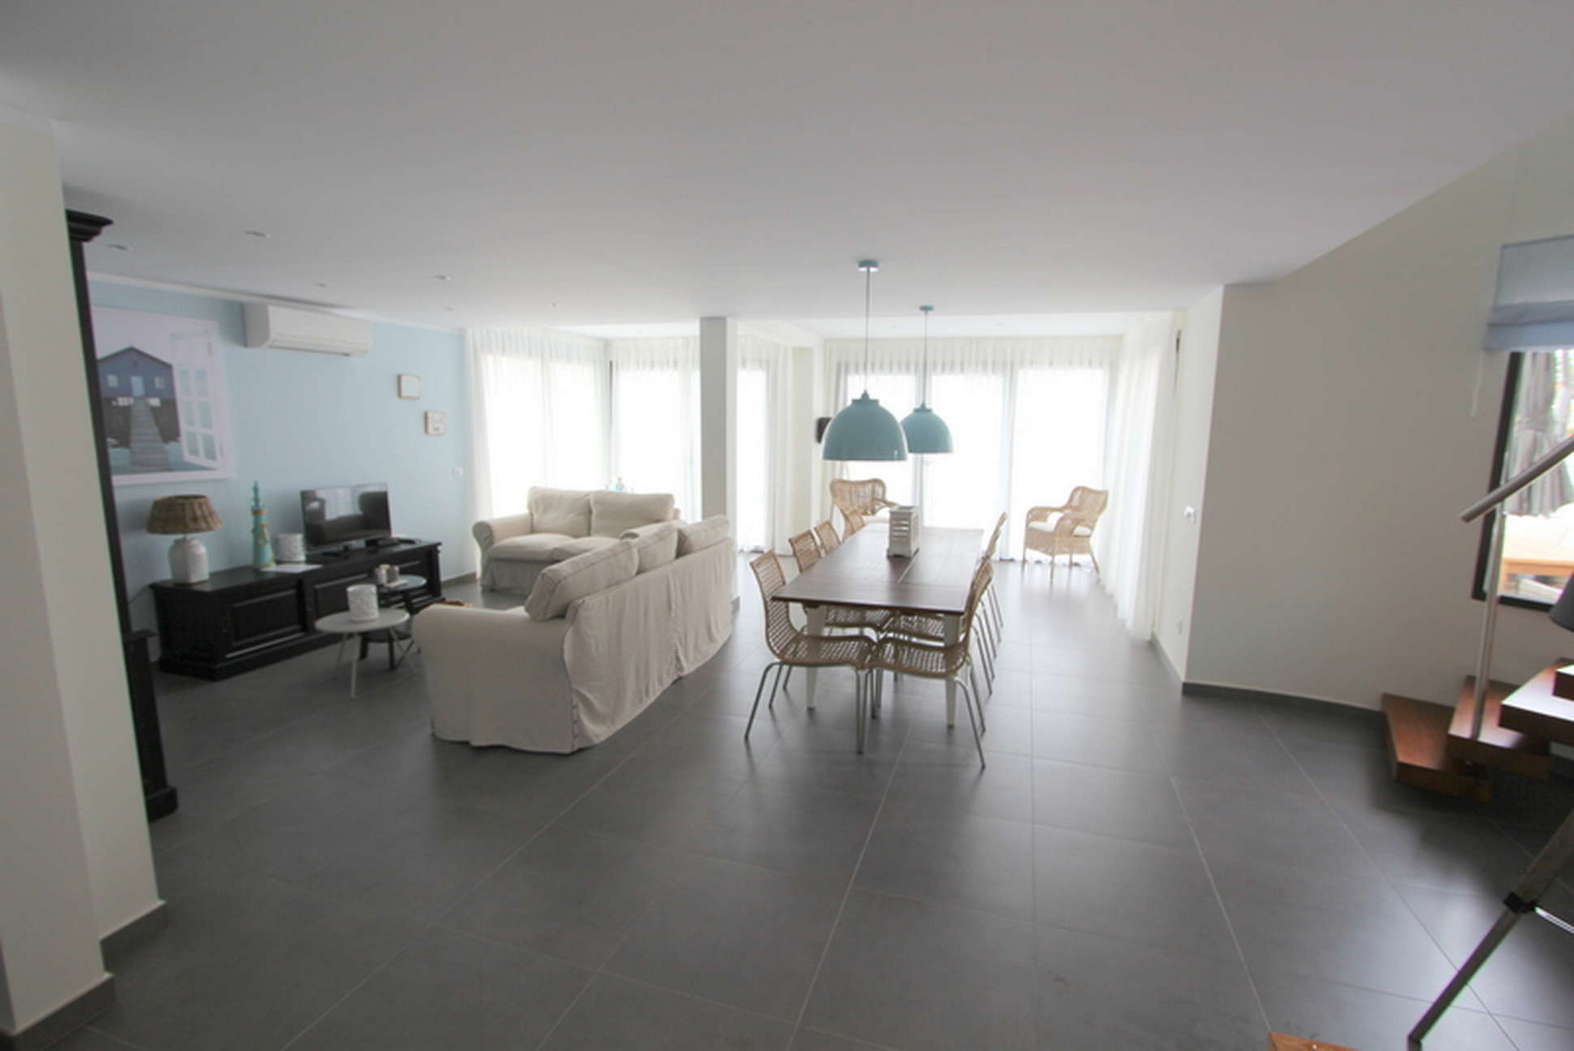 SPLENDID HOUSE ON THE CANAL RENOVATED FOR SALE IN EMPURIABRAVA